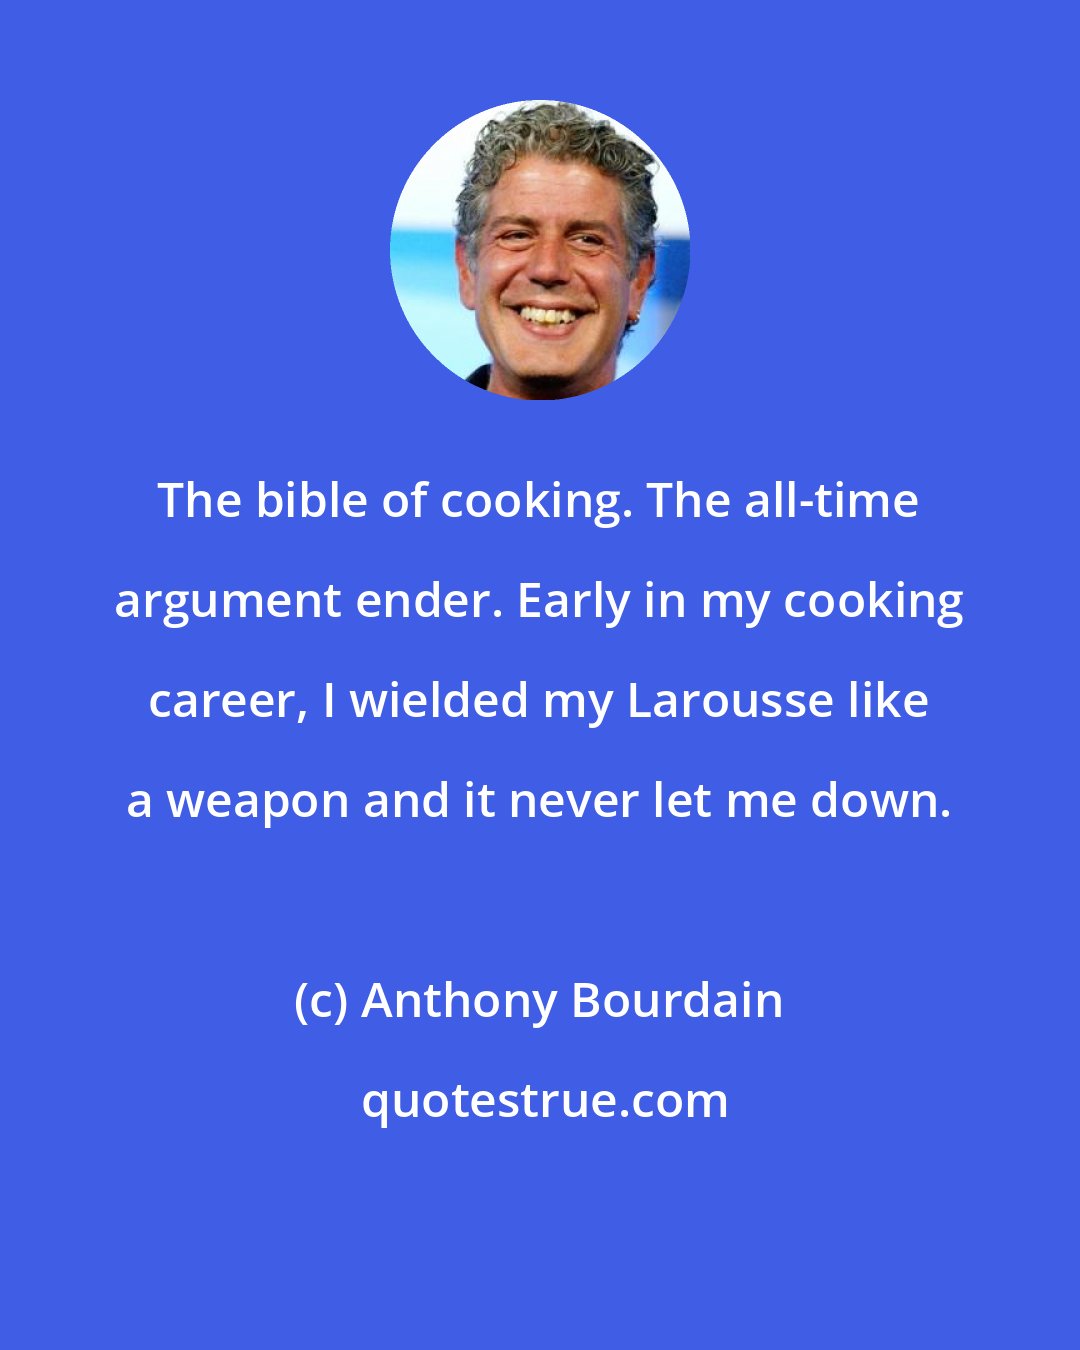 Anthony Bourdain: The bible of cooking. The all-time argument ender. Early in my cooking career, I wielded my Larousse like a weapon and it never let me down.